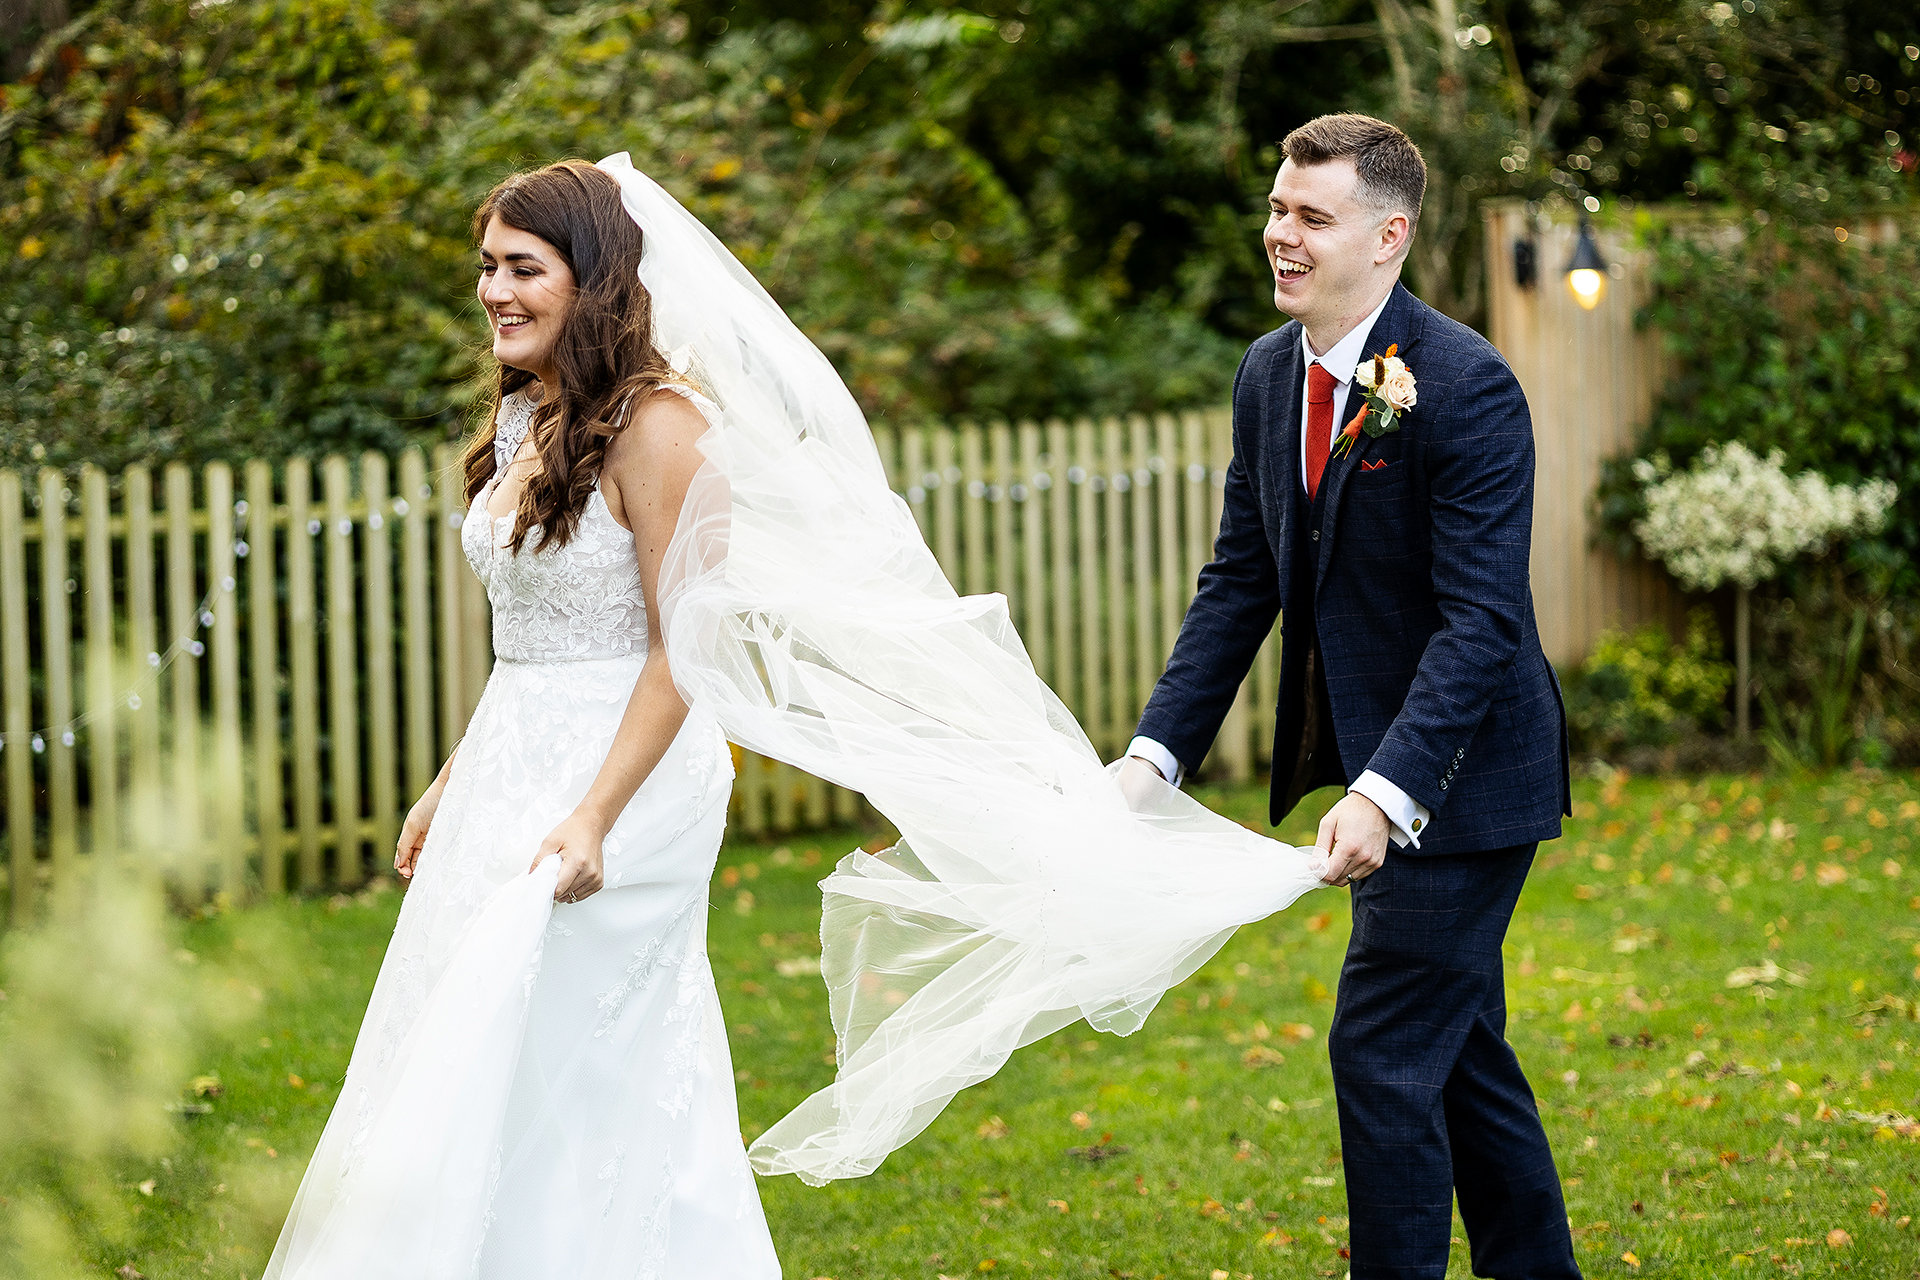 relaxed and informal wedding photography in wirral